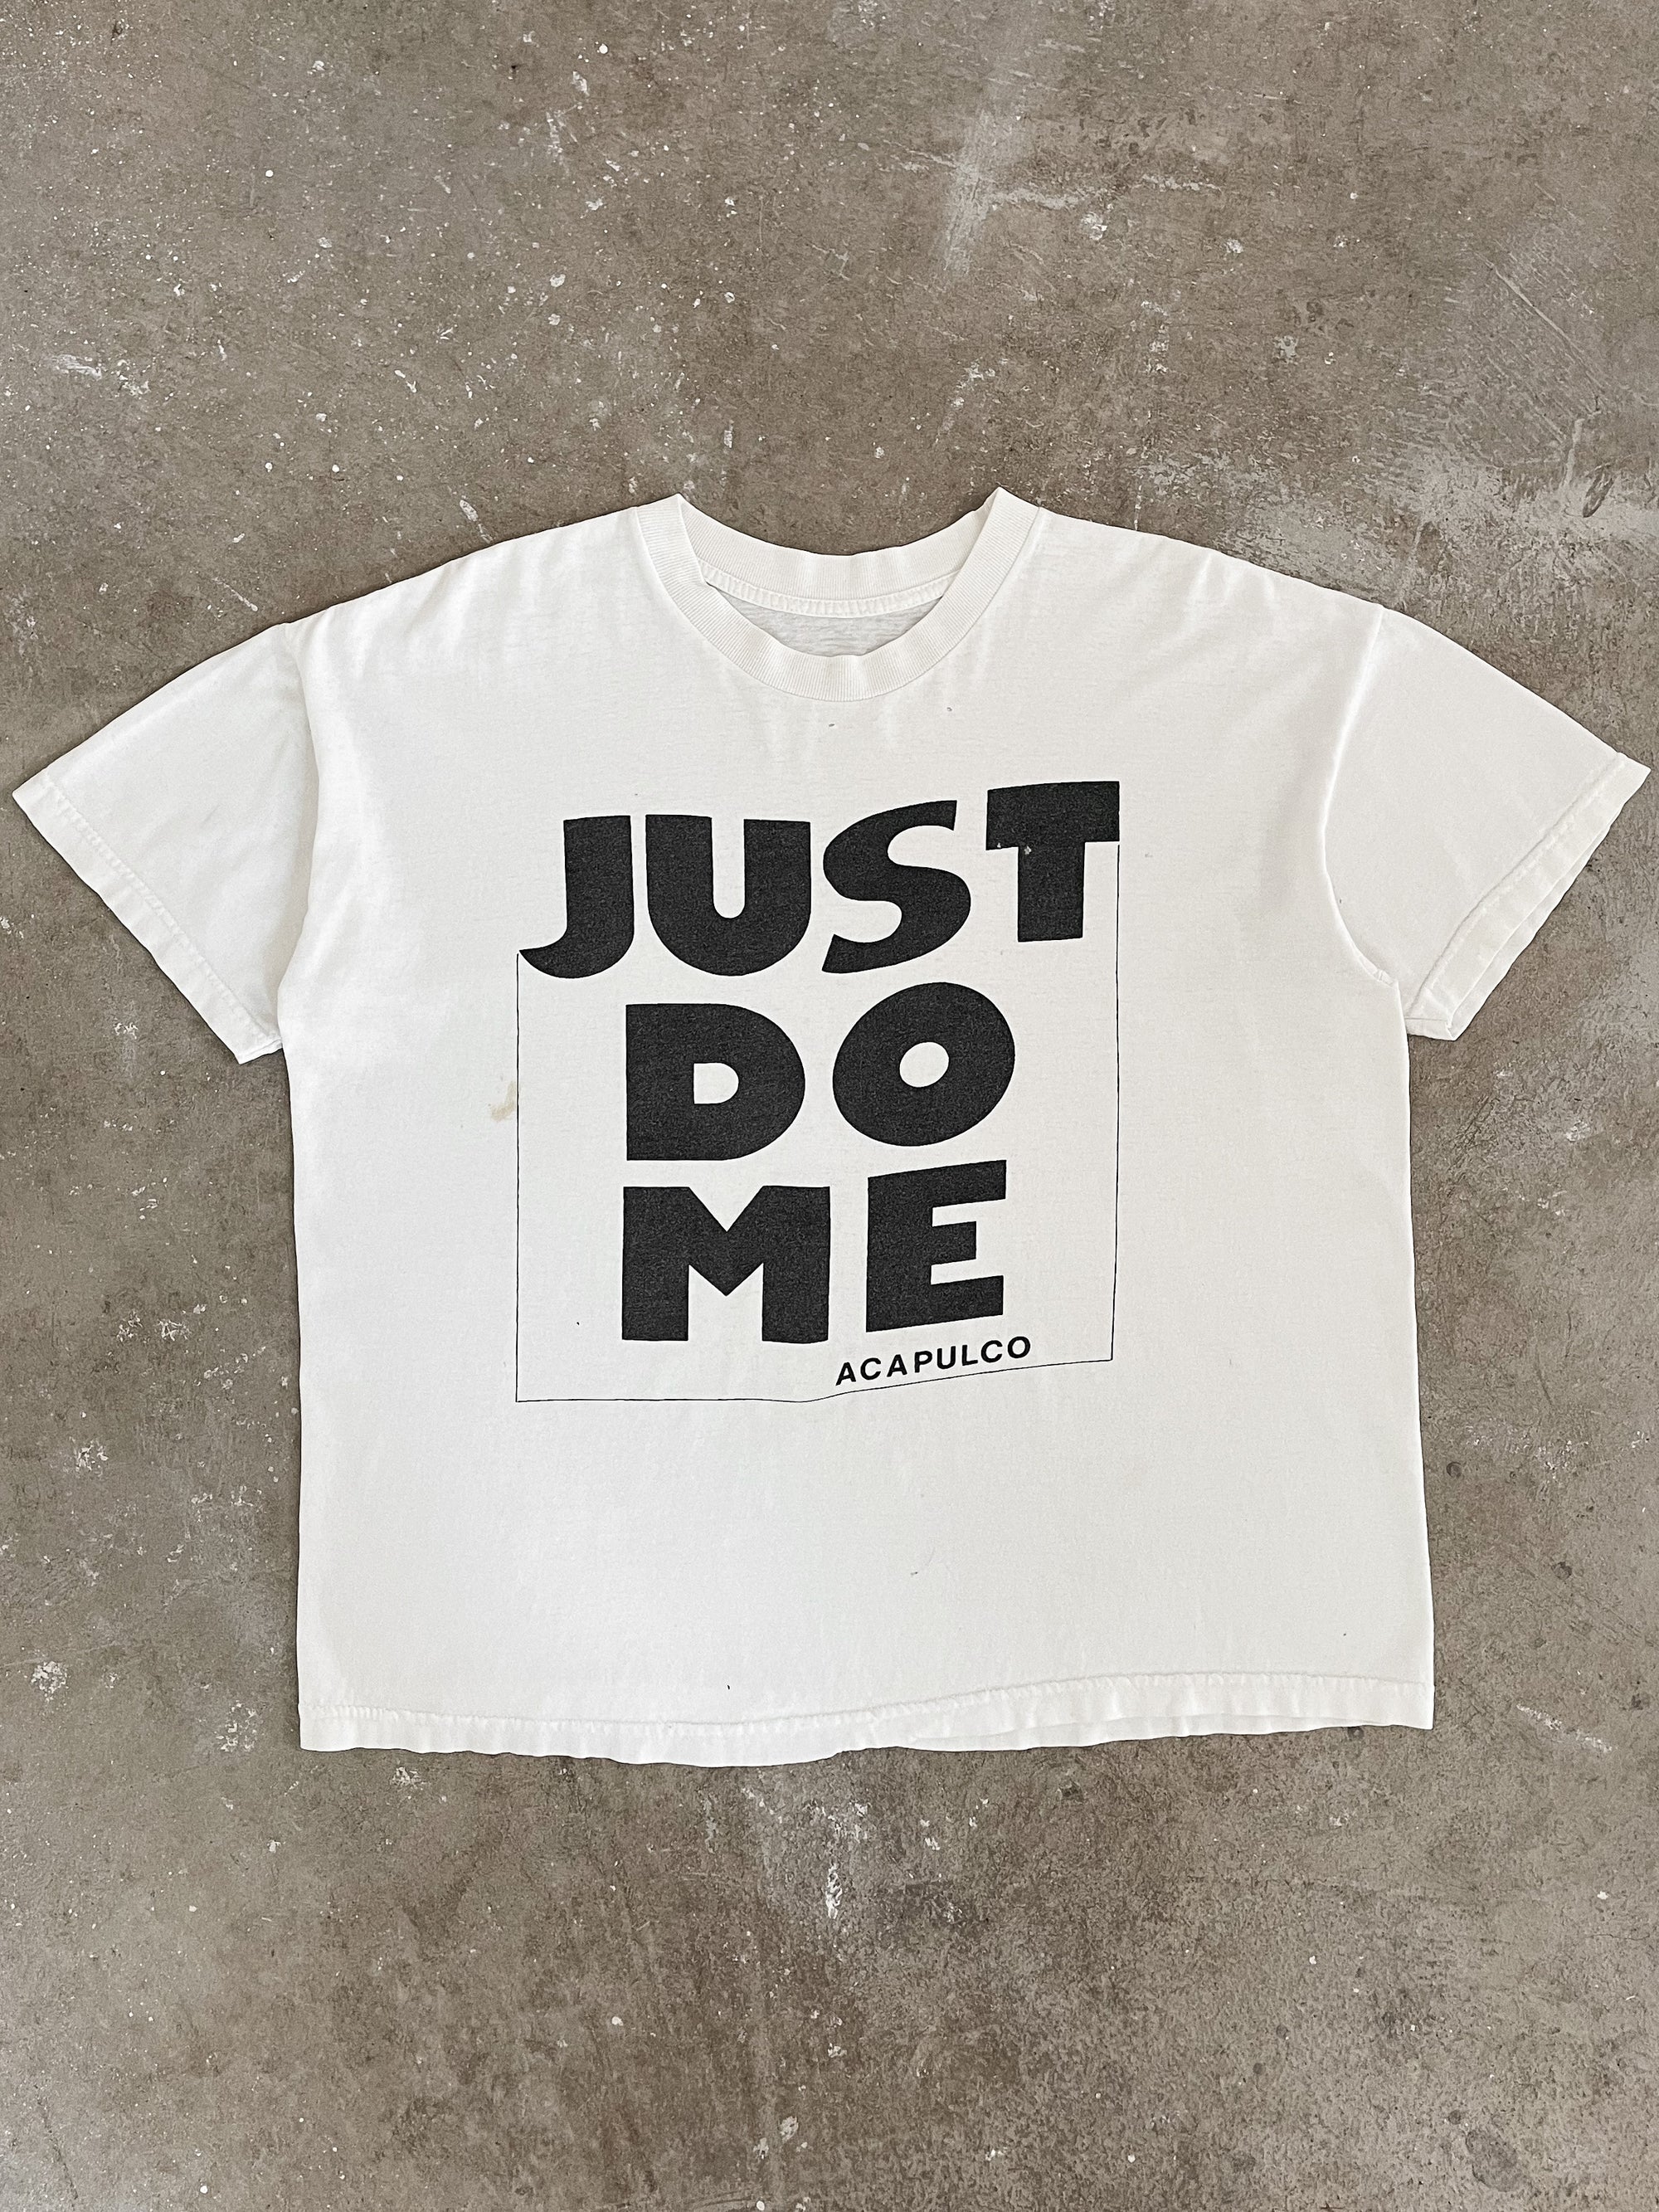 1990s/00s “Just Do Me” Tee (M/L)